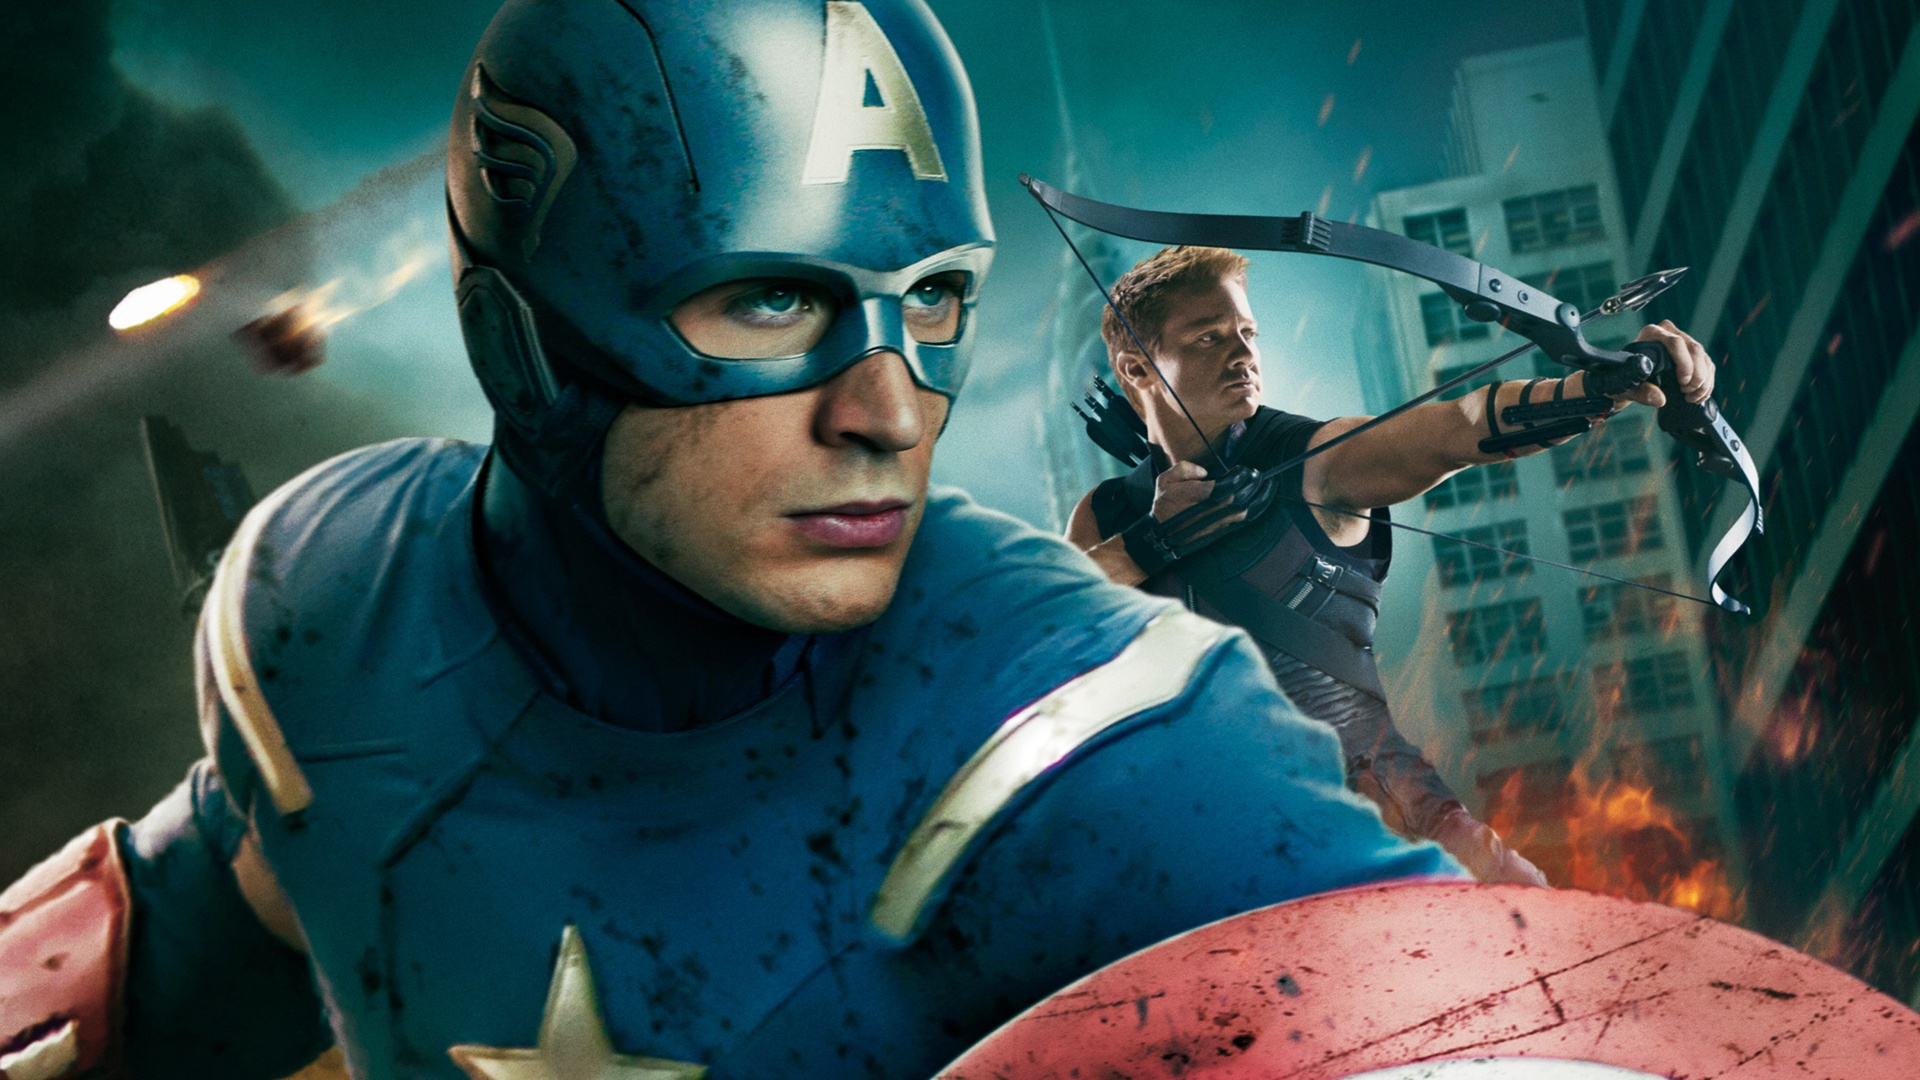 Captain America in Avengers Movie Wallpapers HD 1080p HD Wallpapers